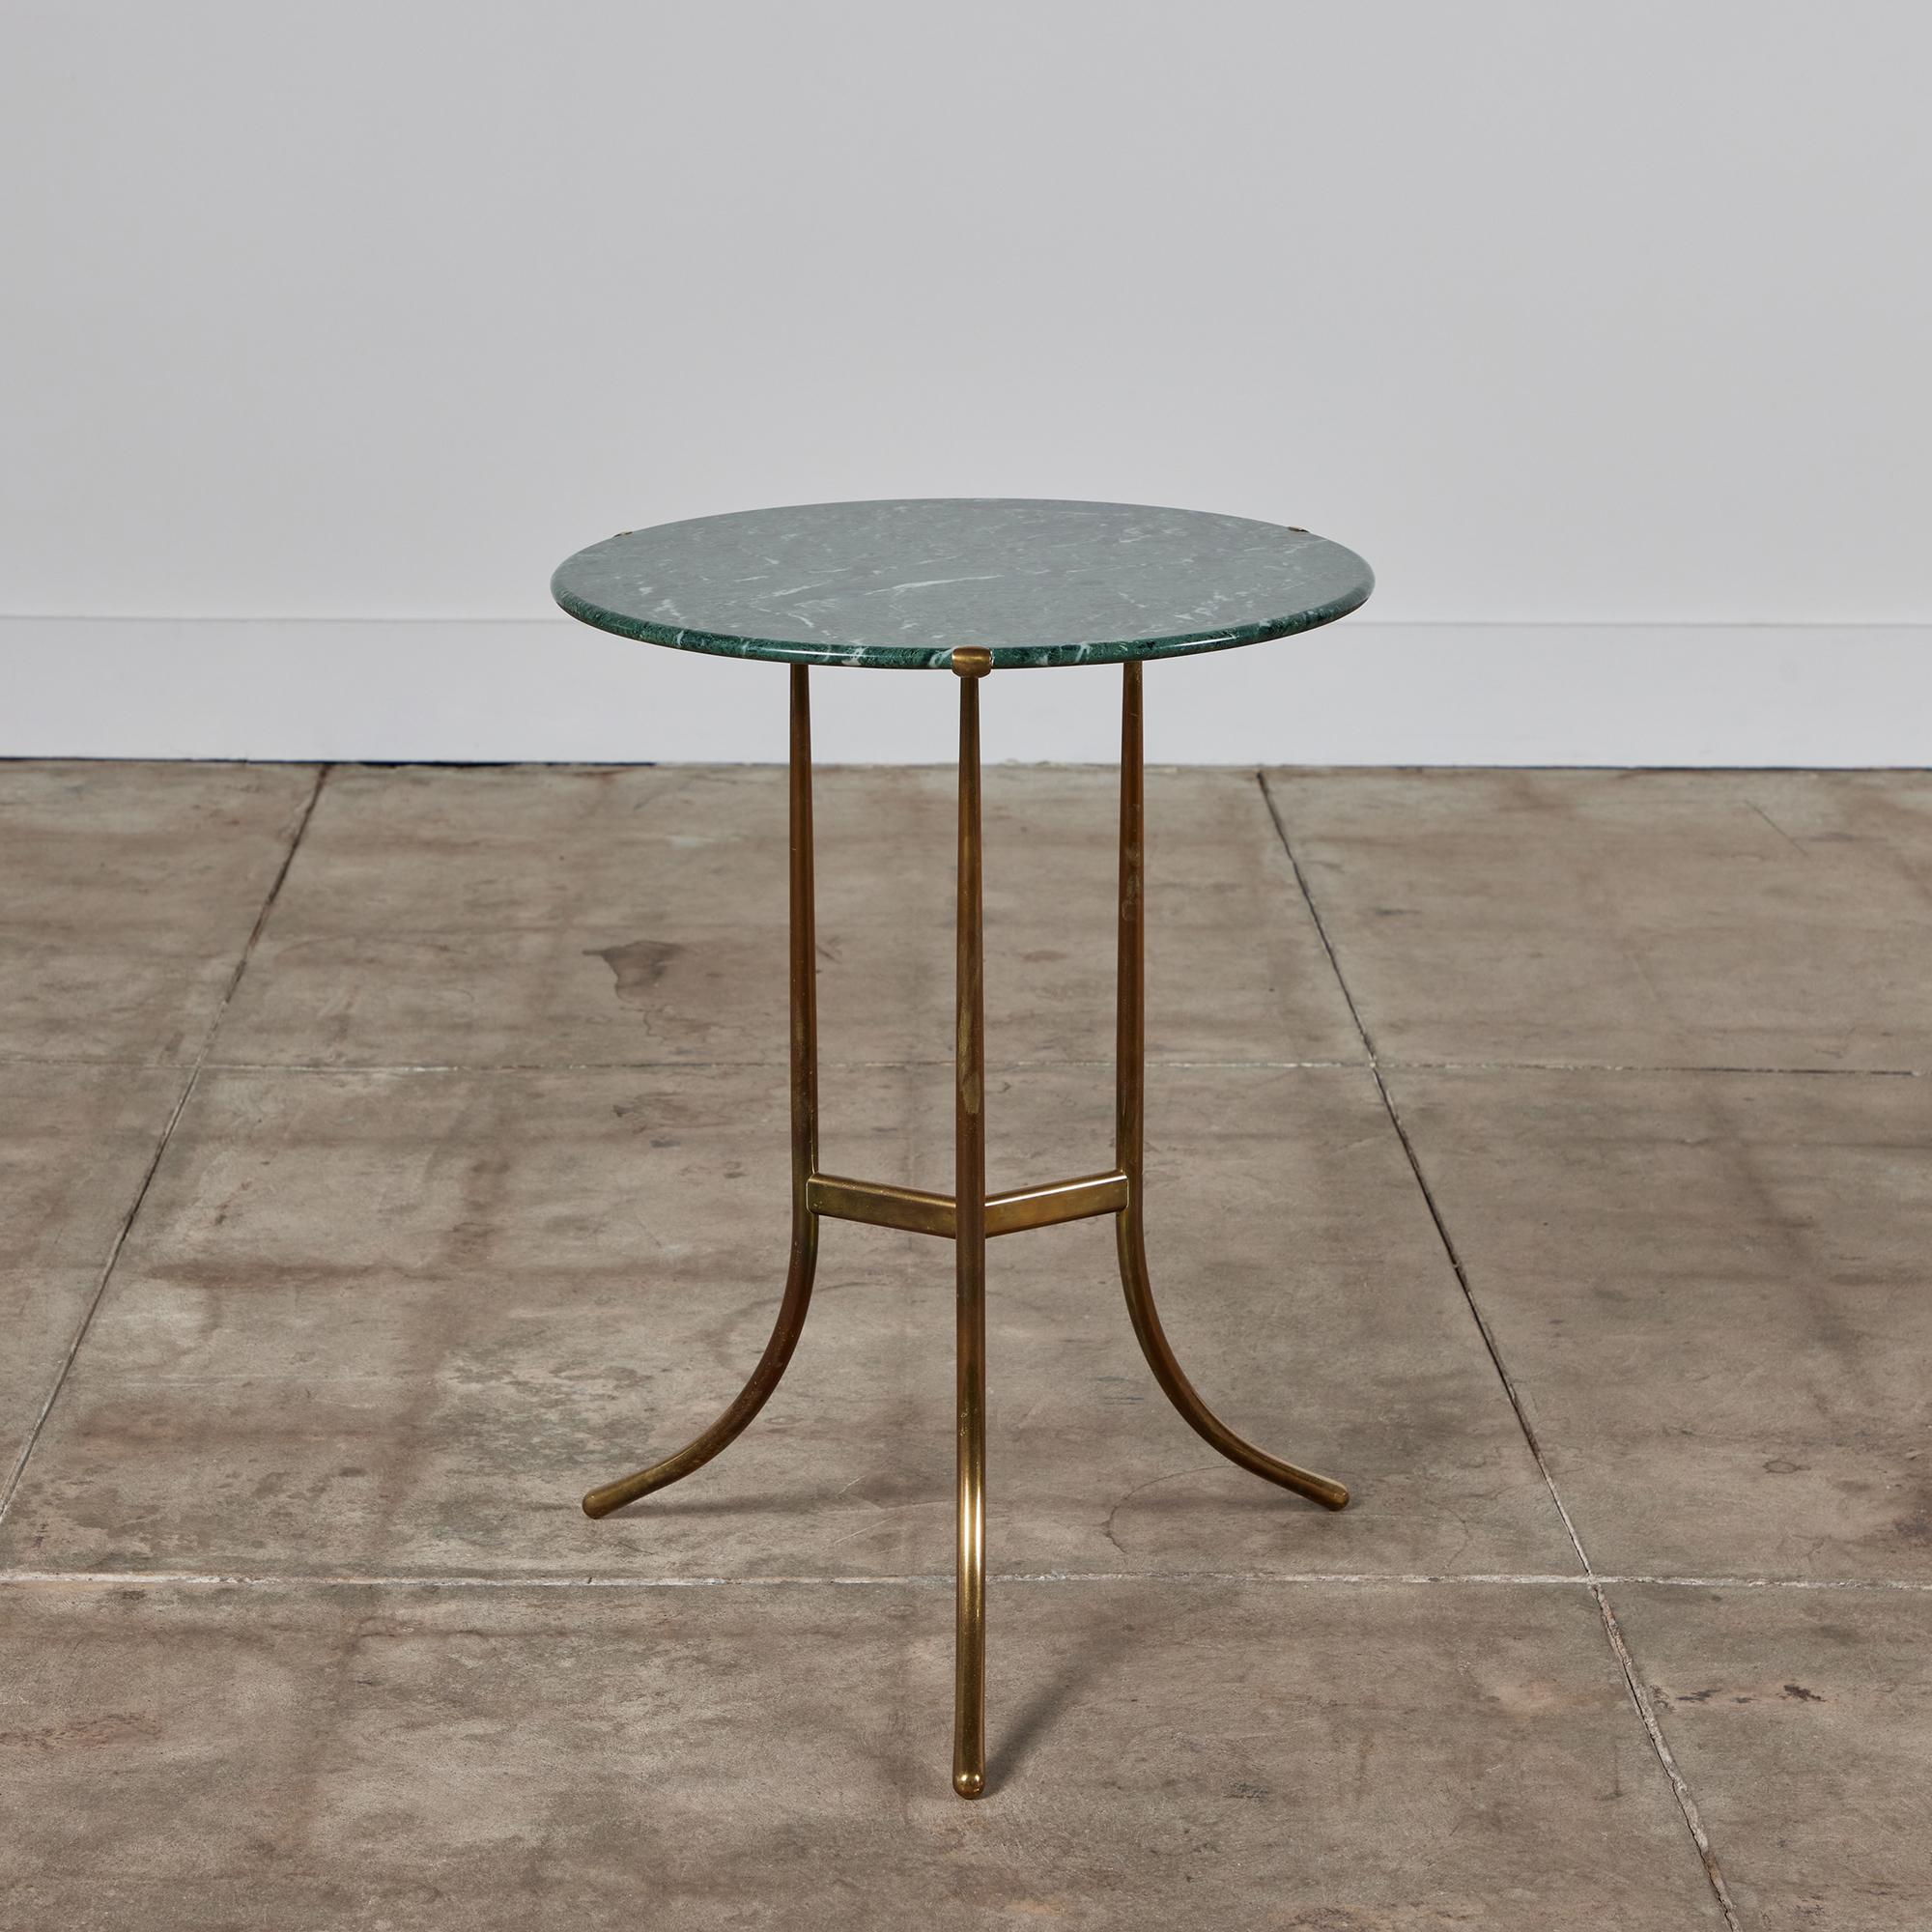 Cedric Hartman brass and marble side table circa 1970s, USA. A round green marble stone table top with cream veining rests inside three delicate brass prongs. The table features a pedestal base with three splayed legs, minimal yet